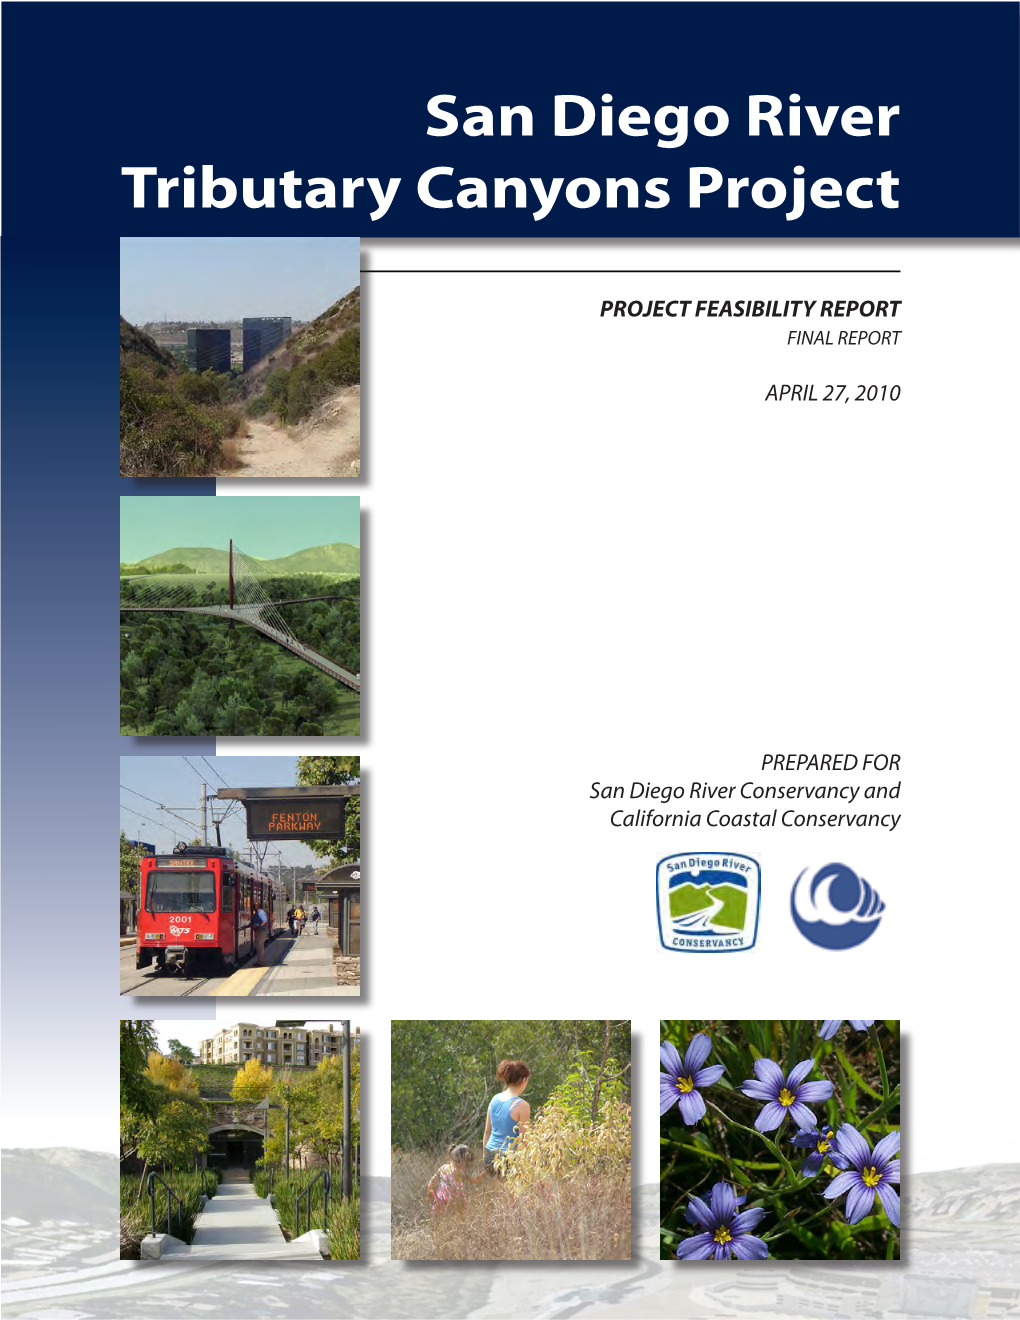 San Diego River Tributary Canyons Project